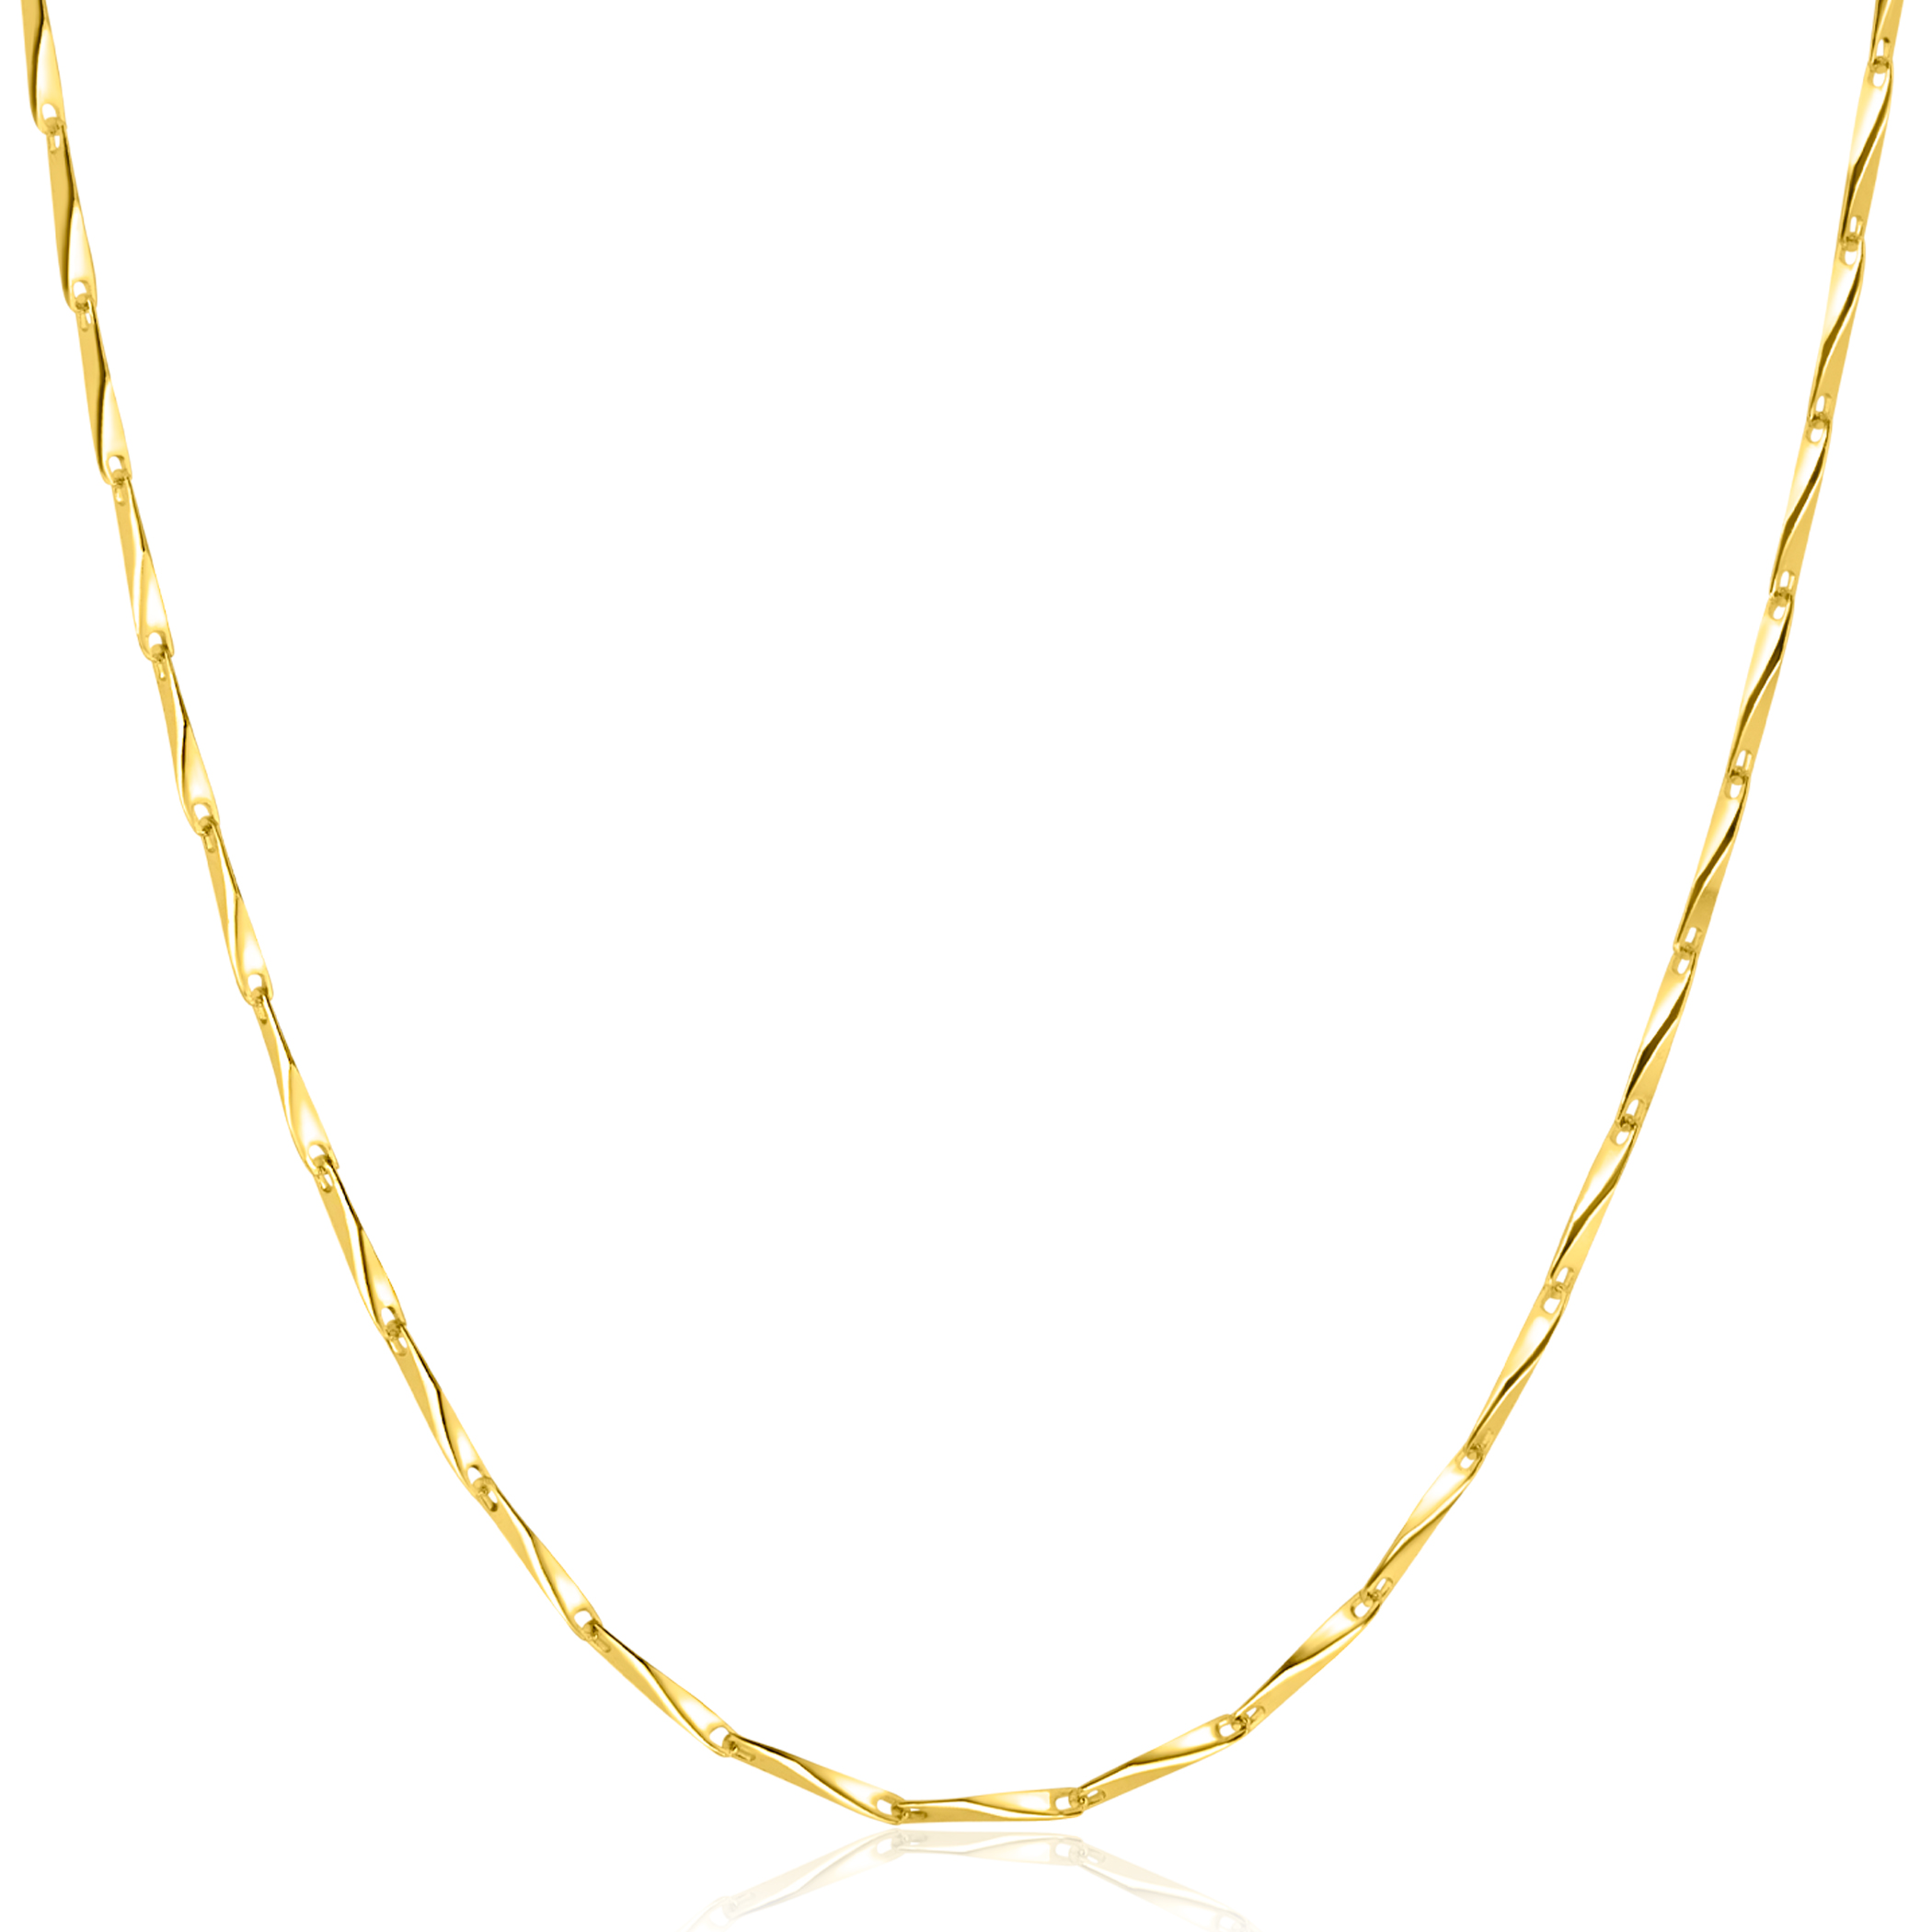 ZINZI Gold Plated Sterling Silver Chain Necklace with Shiny Arrow-shaped Chains width 1,5mm 42-45cm ZIC2414G